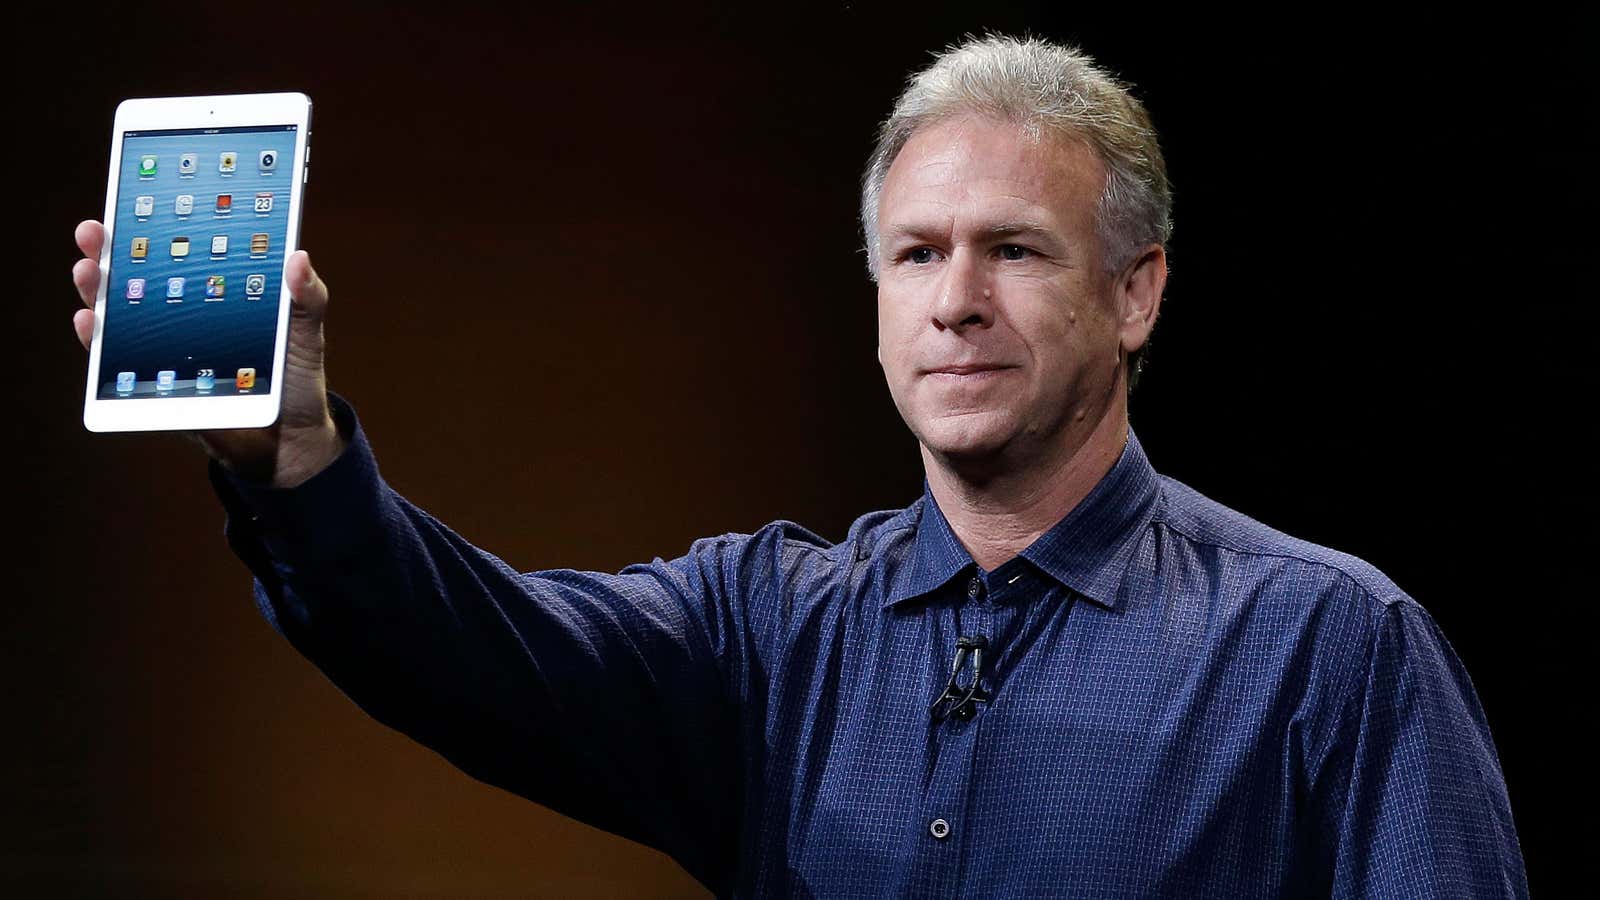 Phil Schiller, senior vice president at Apple, reveals the iPad Mini—with one hand.